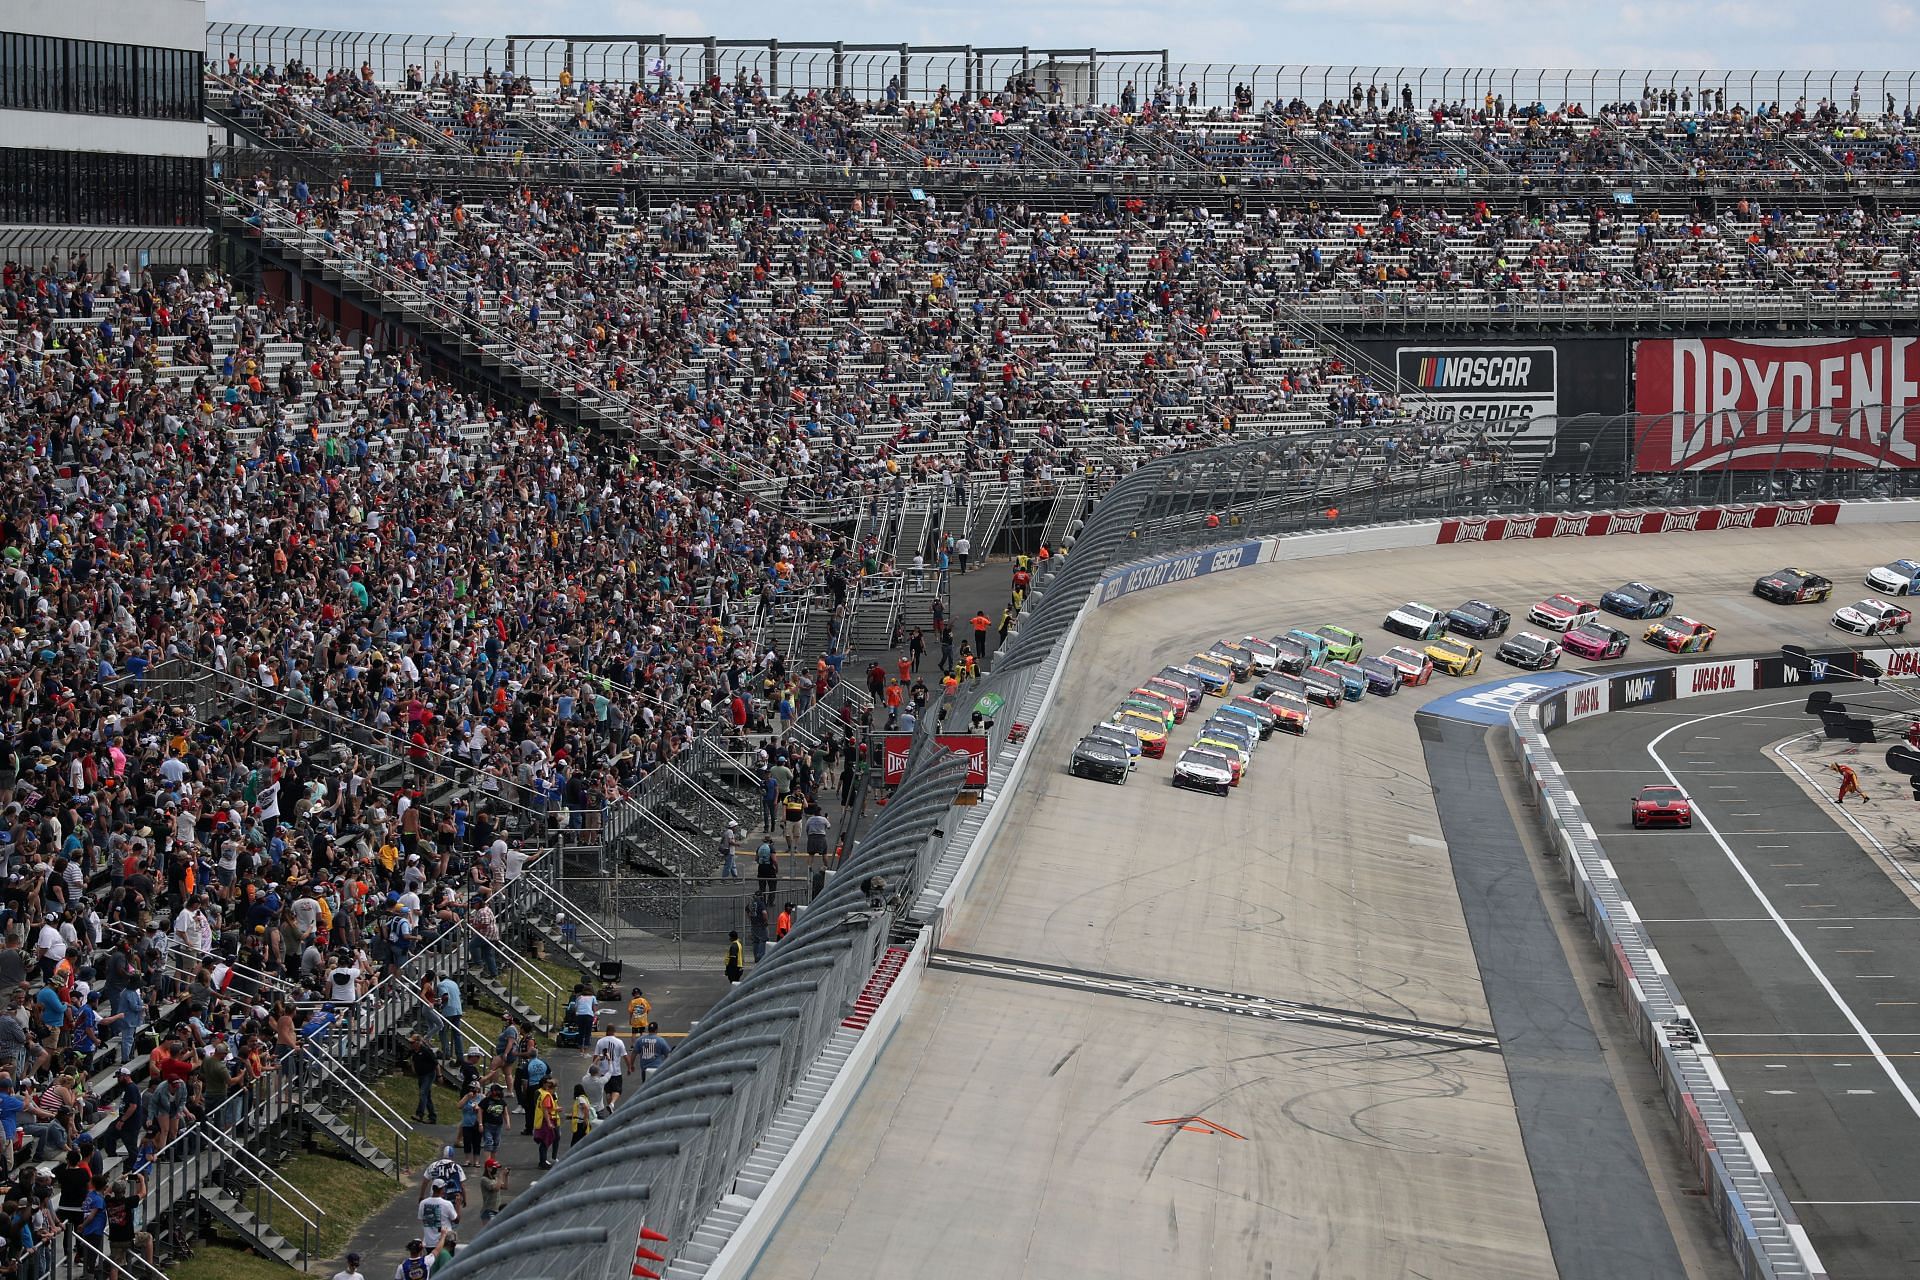 A general view of cars racing during the NASCAR Cup Series Drydene 400 at Dover International Speedway. (Photo by James Gilbert/Getty Images)